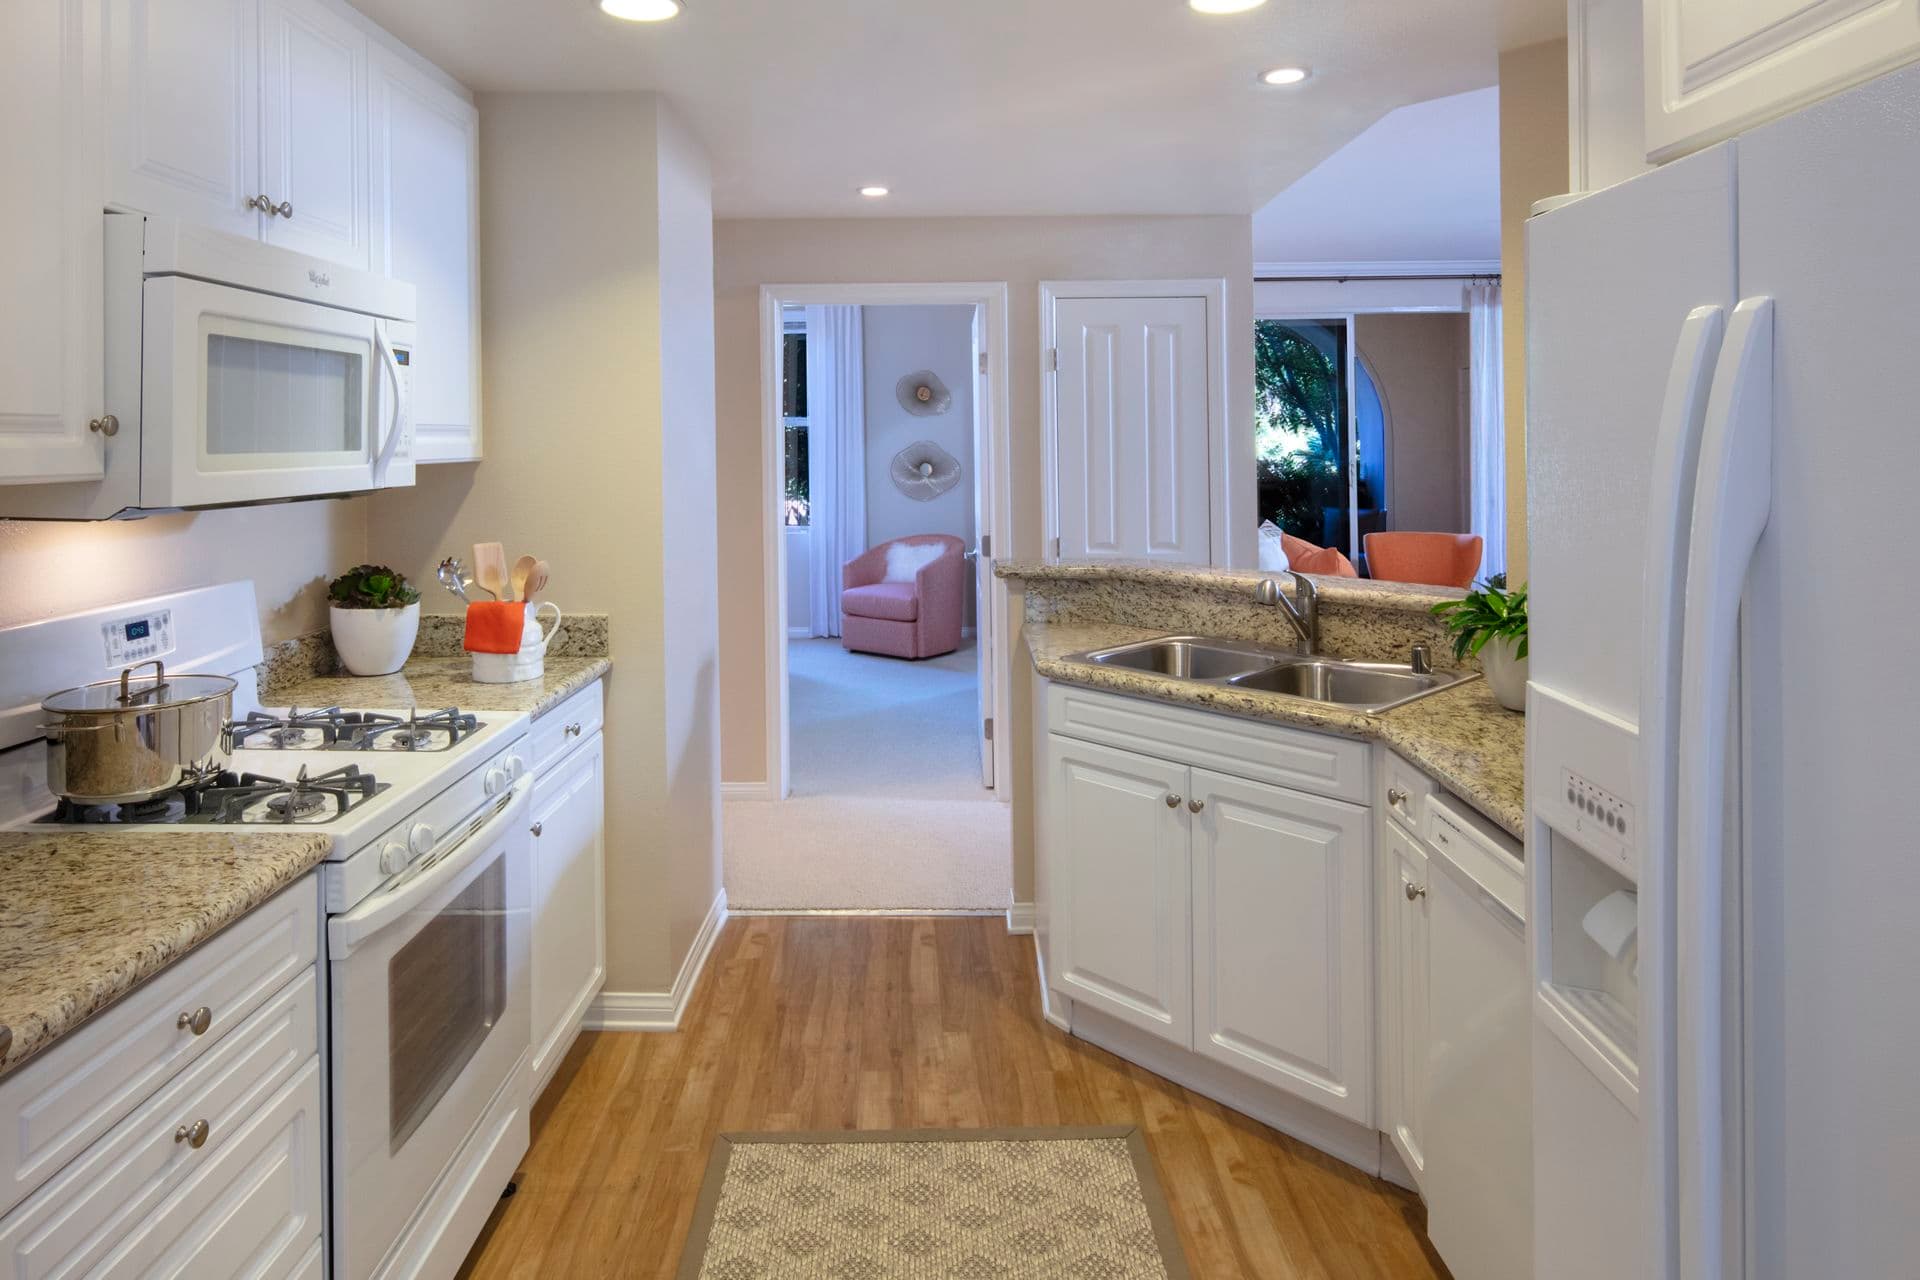 Interior view of kitchen at Portola Place Apartment Homes in Irvine, CA.